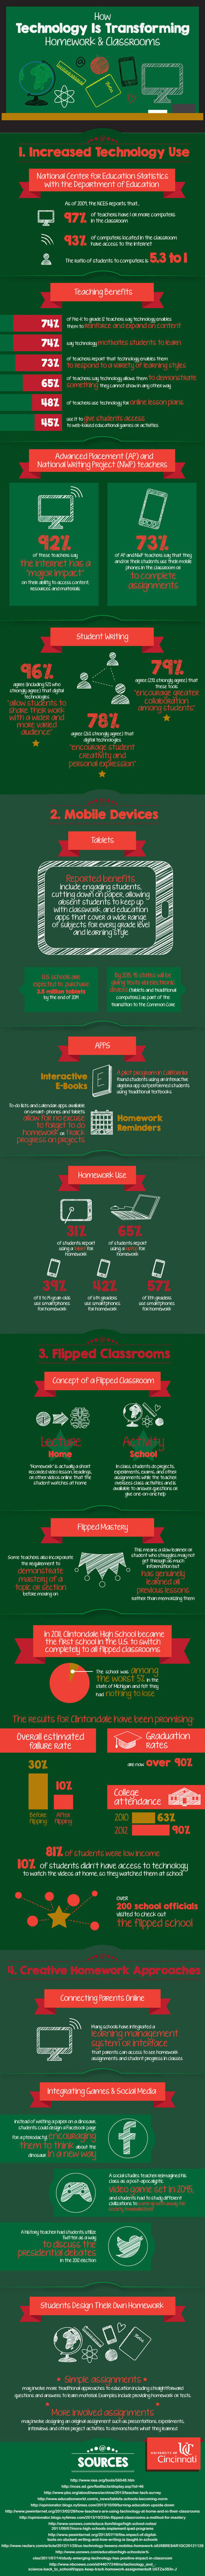 How Technology Transforms Classrooms Infographic | iGeneration - 21st Century Education (Pedagogy & Digital Innovation) | Scoop.it